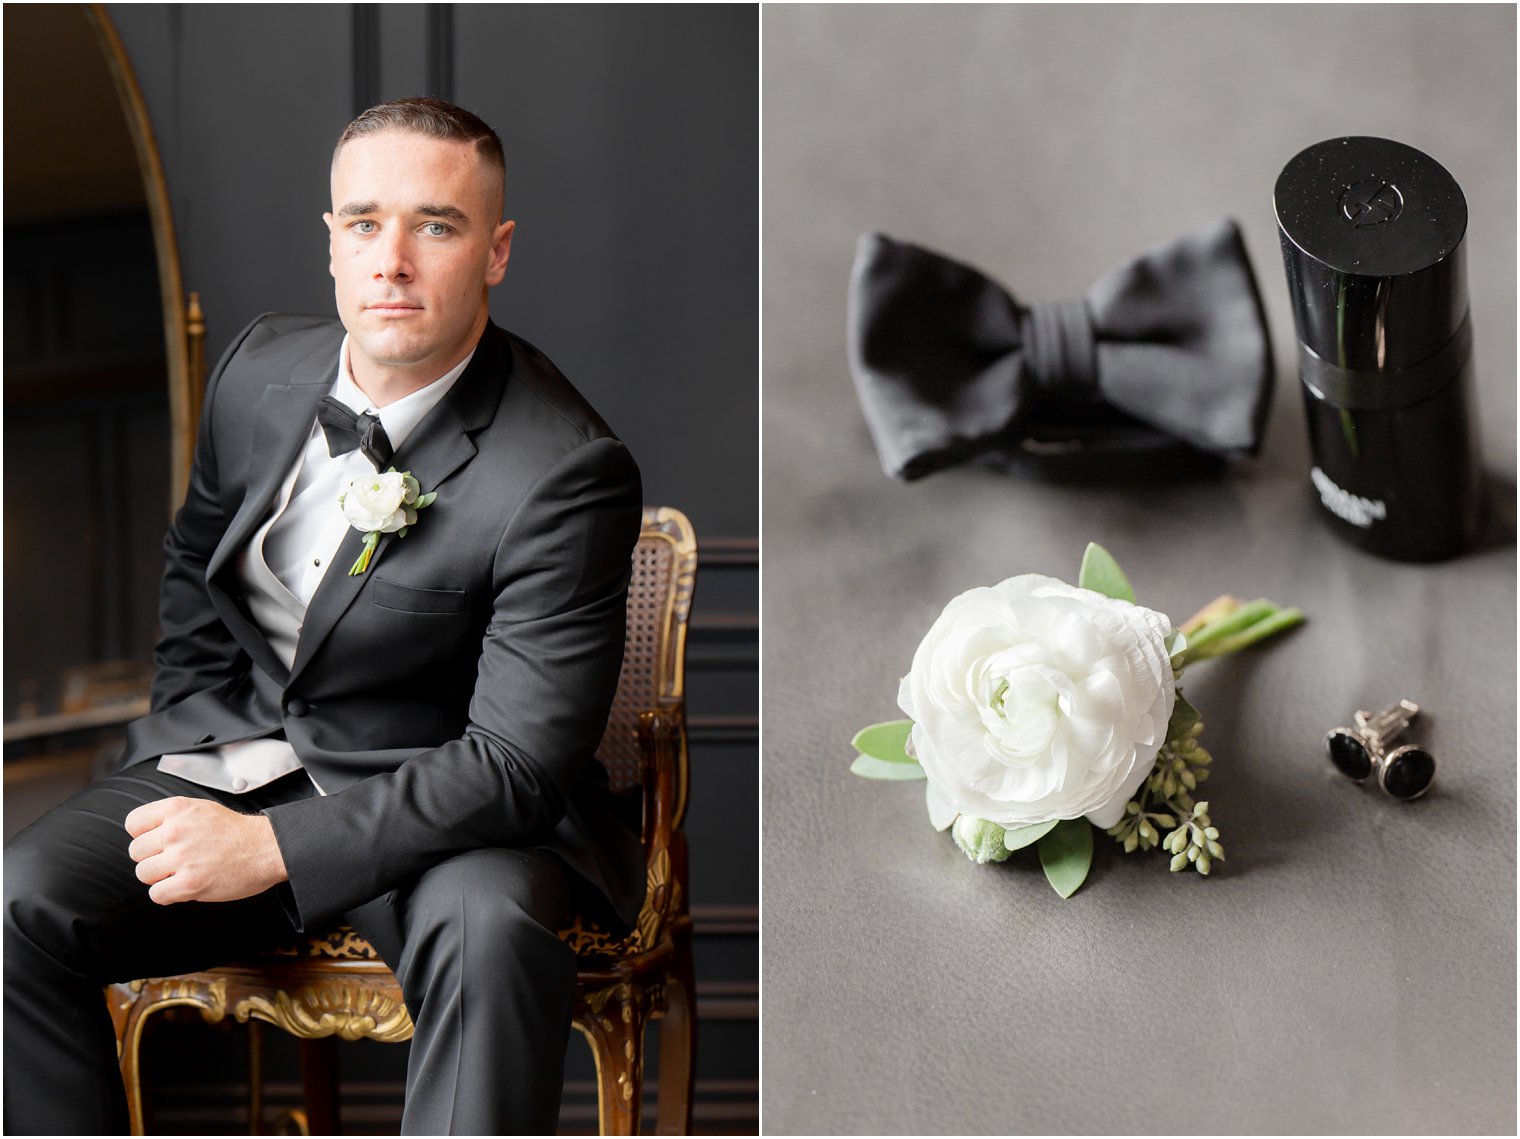 Elegant groom and groom details for a classic black tie wedding